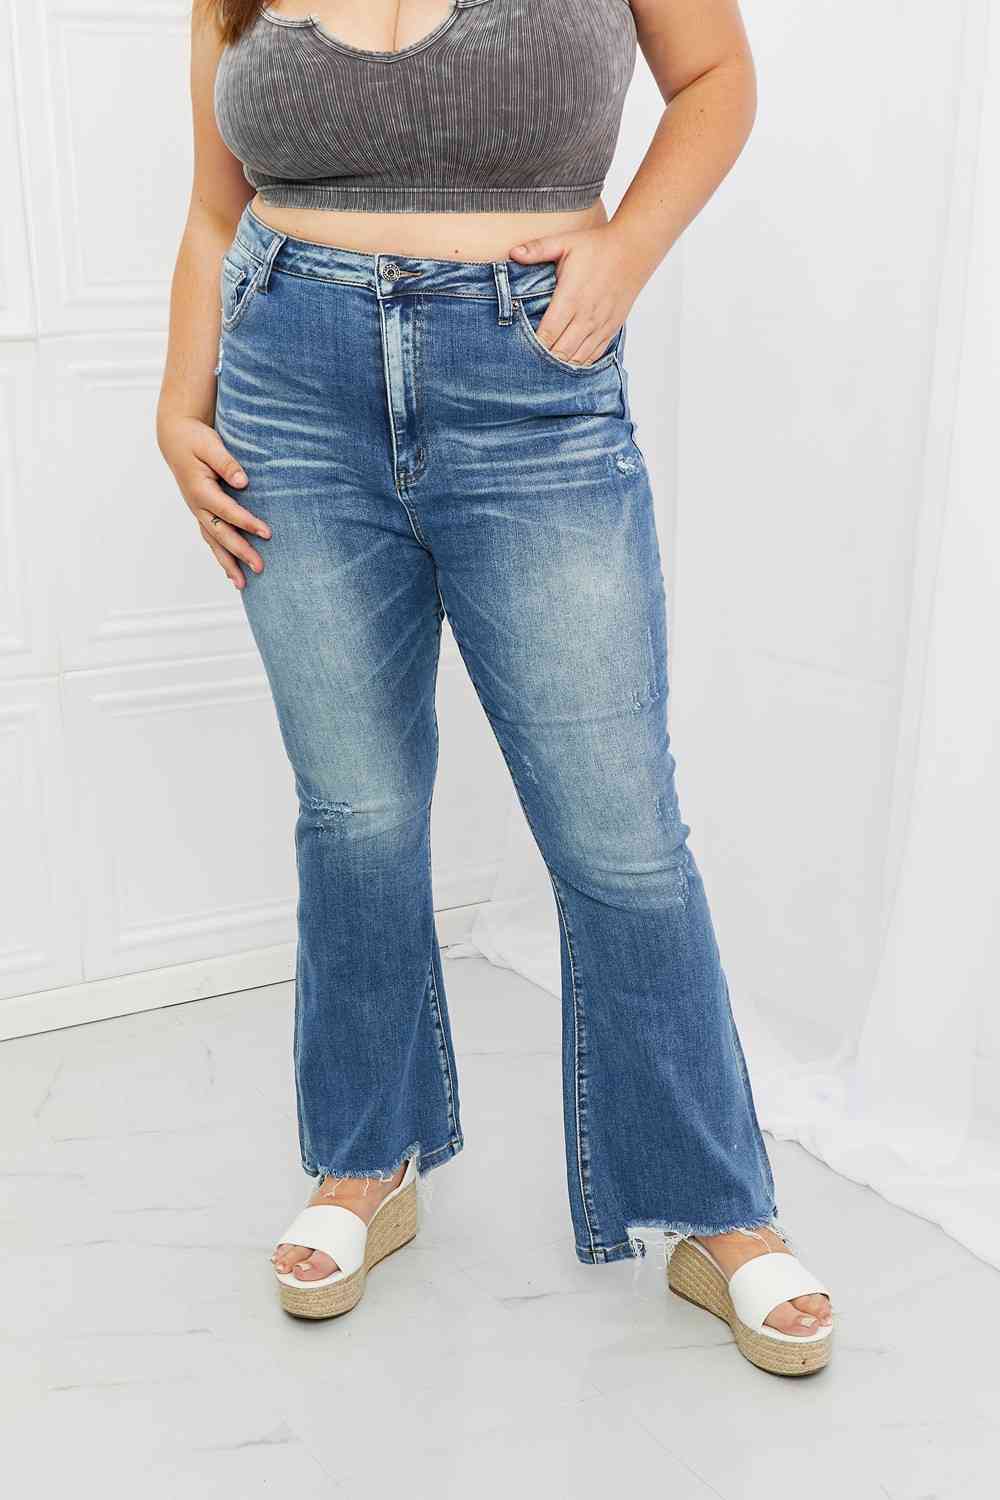 RISEN Full Size Iris High Waisted Flare Jeans - The Teal Antler Boutique